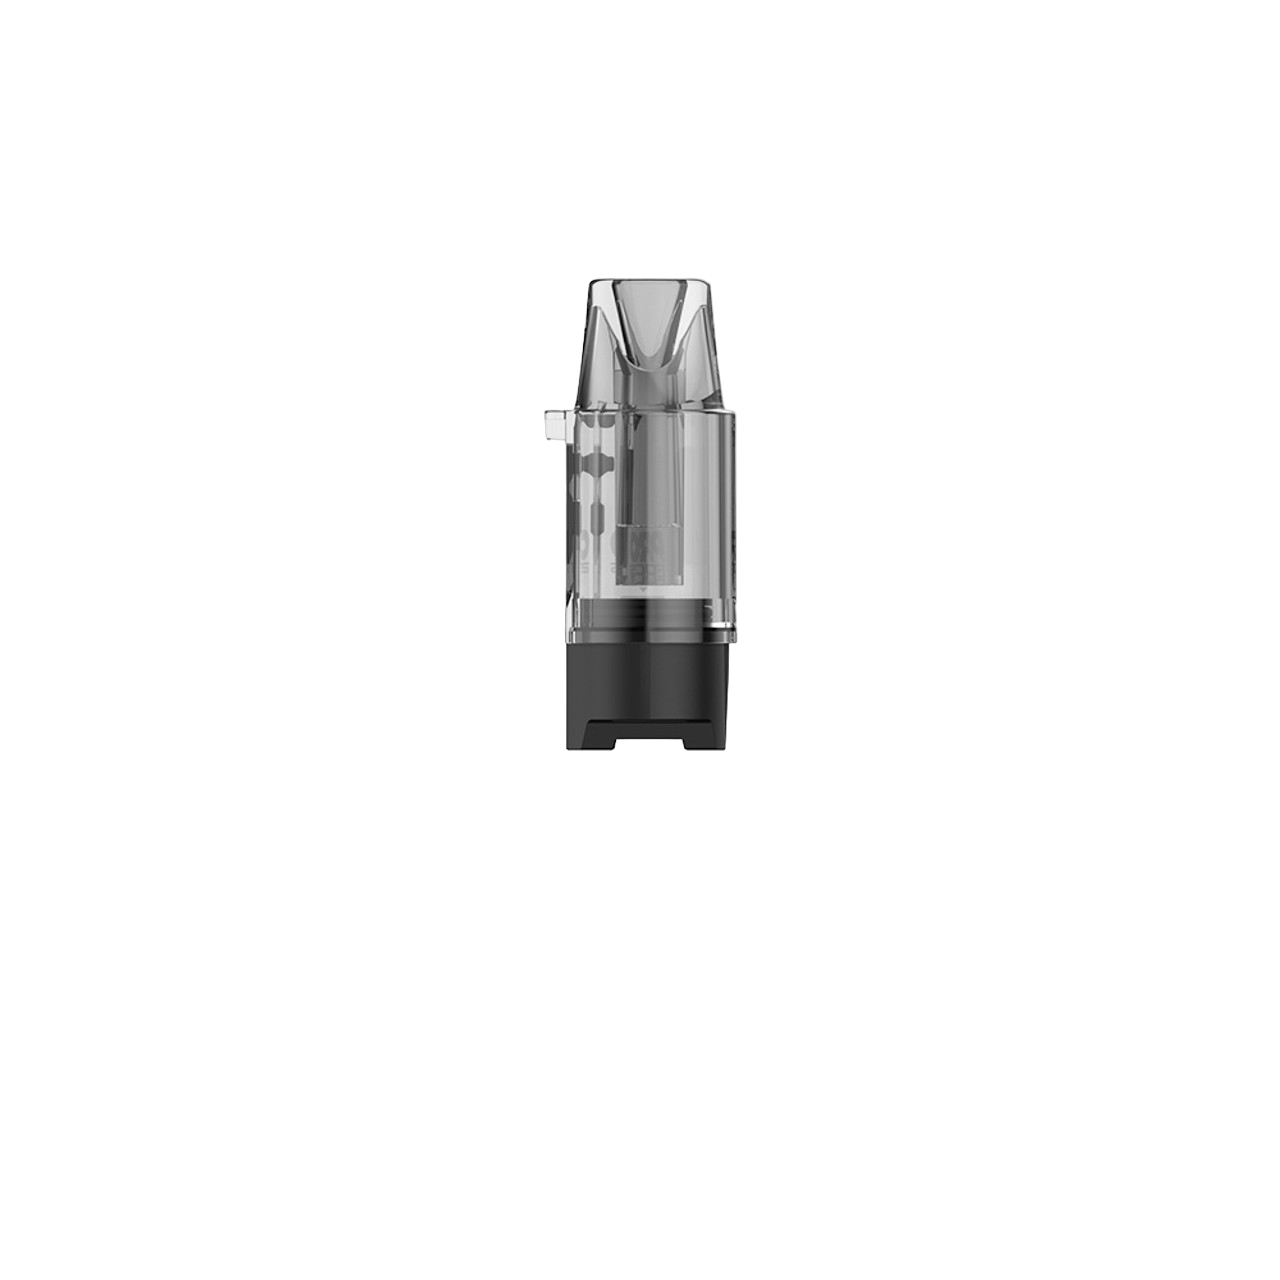 Uwell CALIBURN & IRONFIST L 2.5ML Refillable Replacement Empty Cartridge Pod - Pack of 2